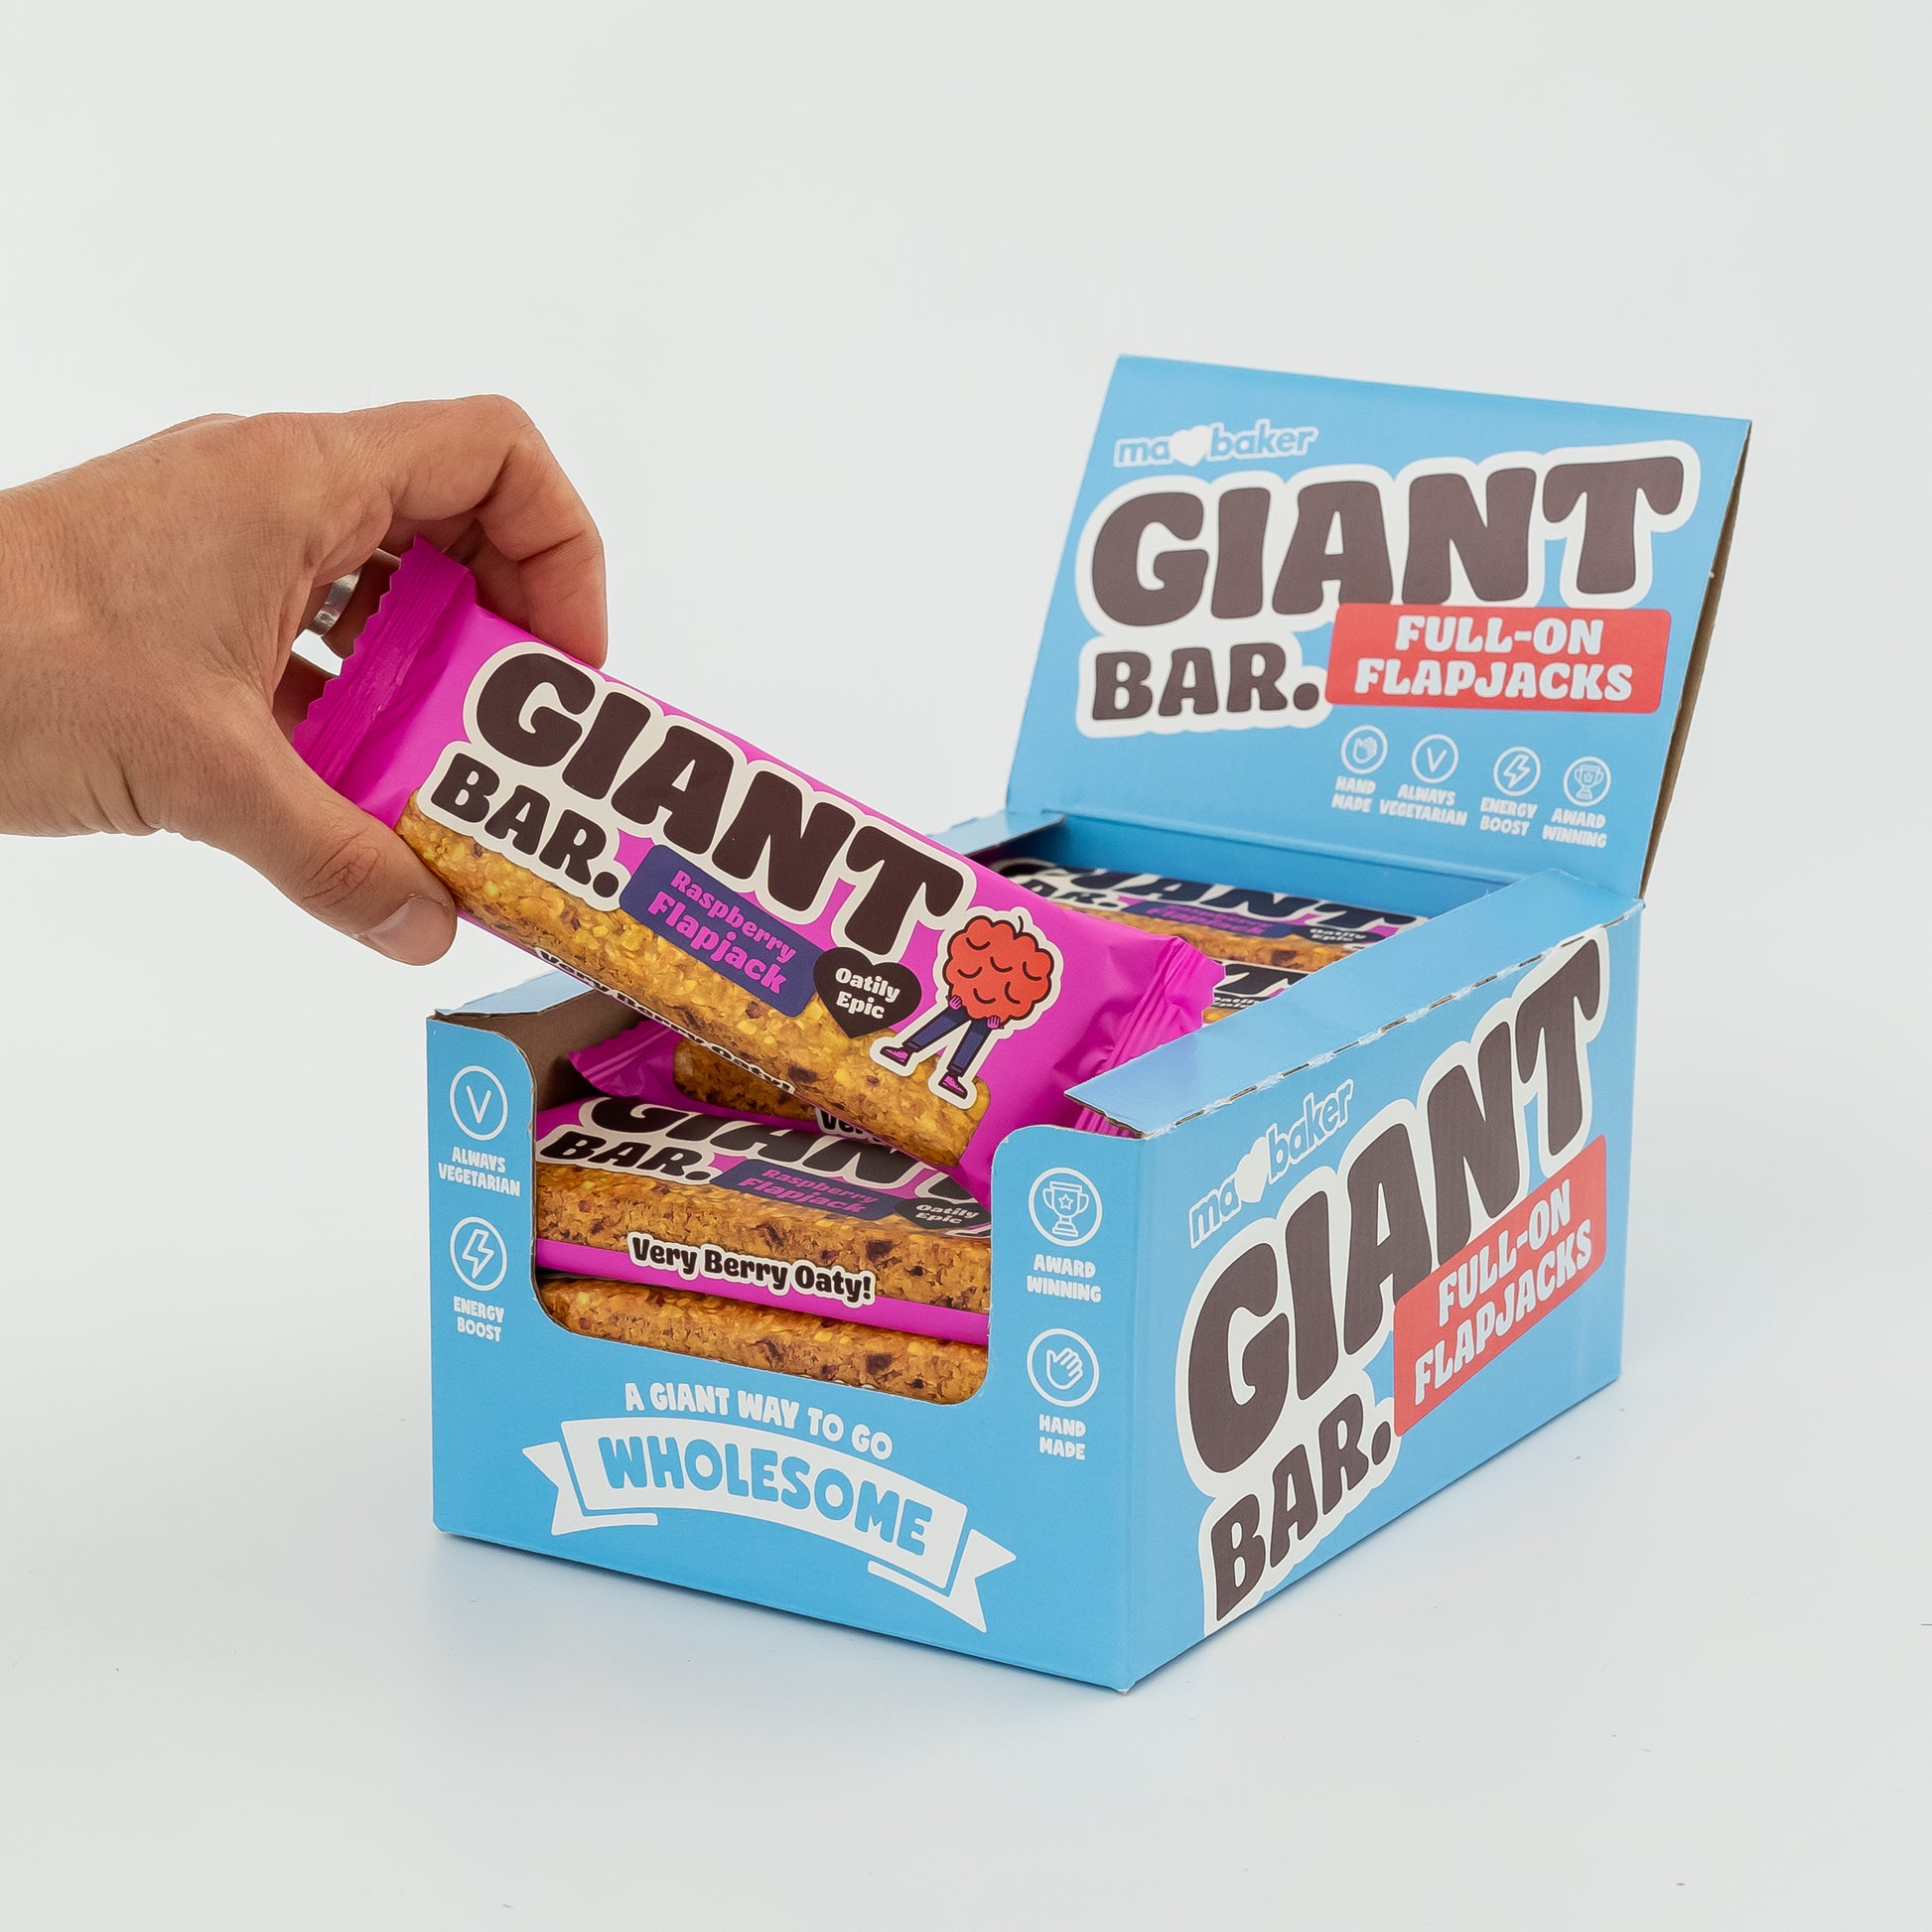 A hand taking a Raspberry Giant Bar from a box of Giant Bars